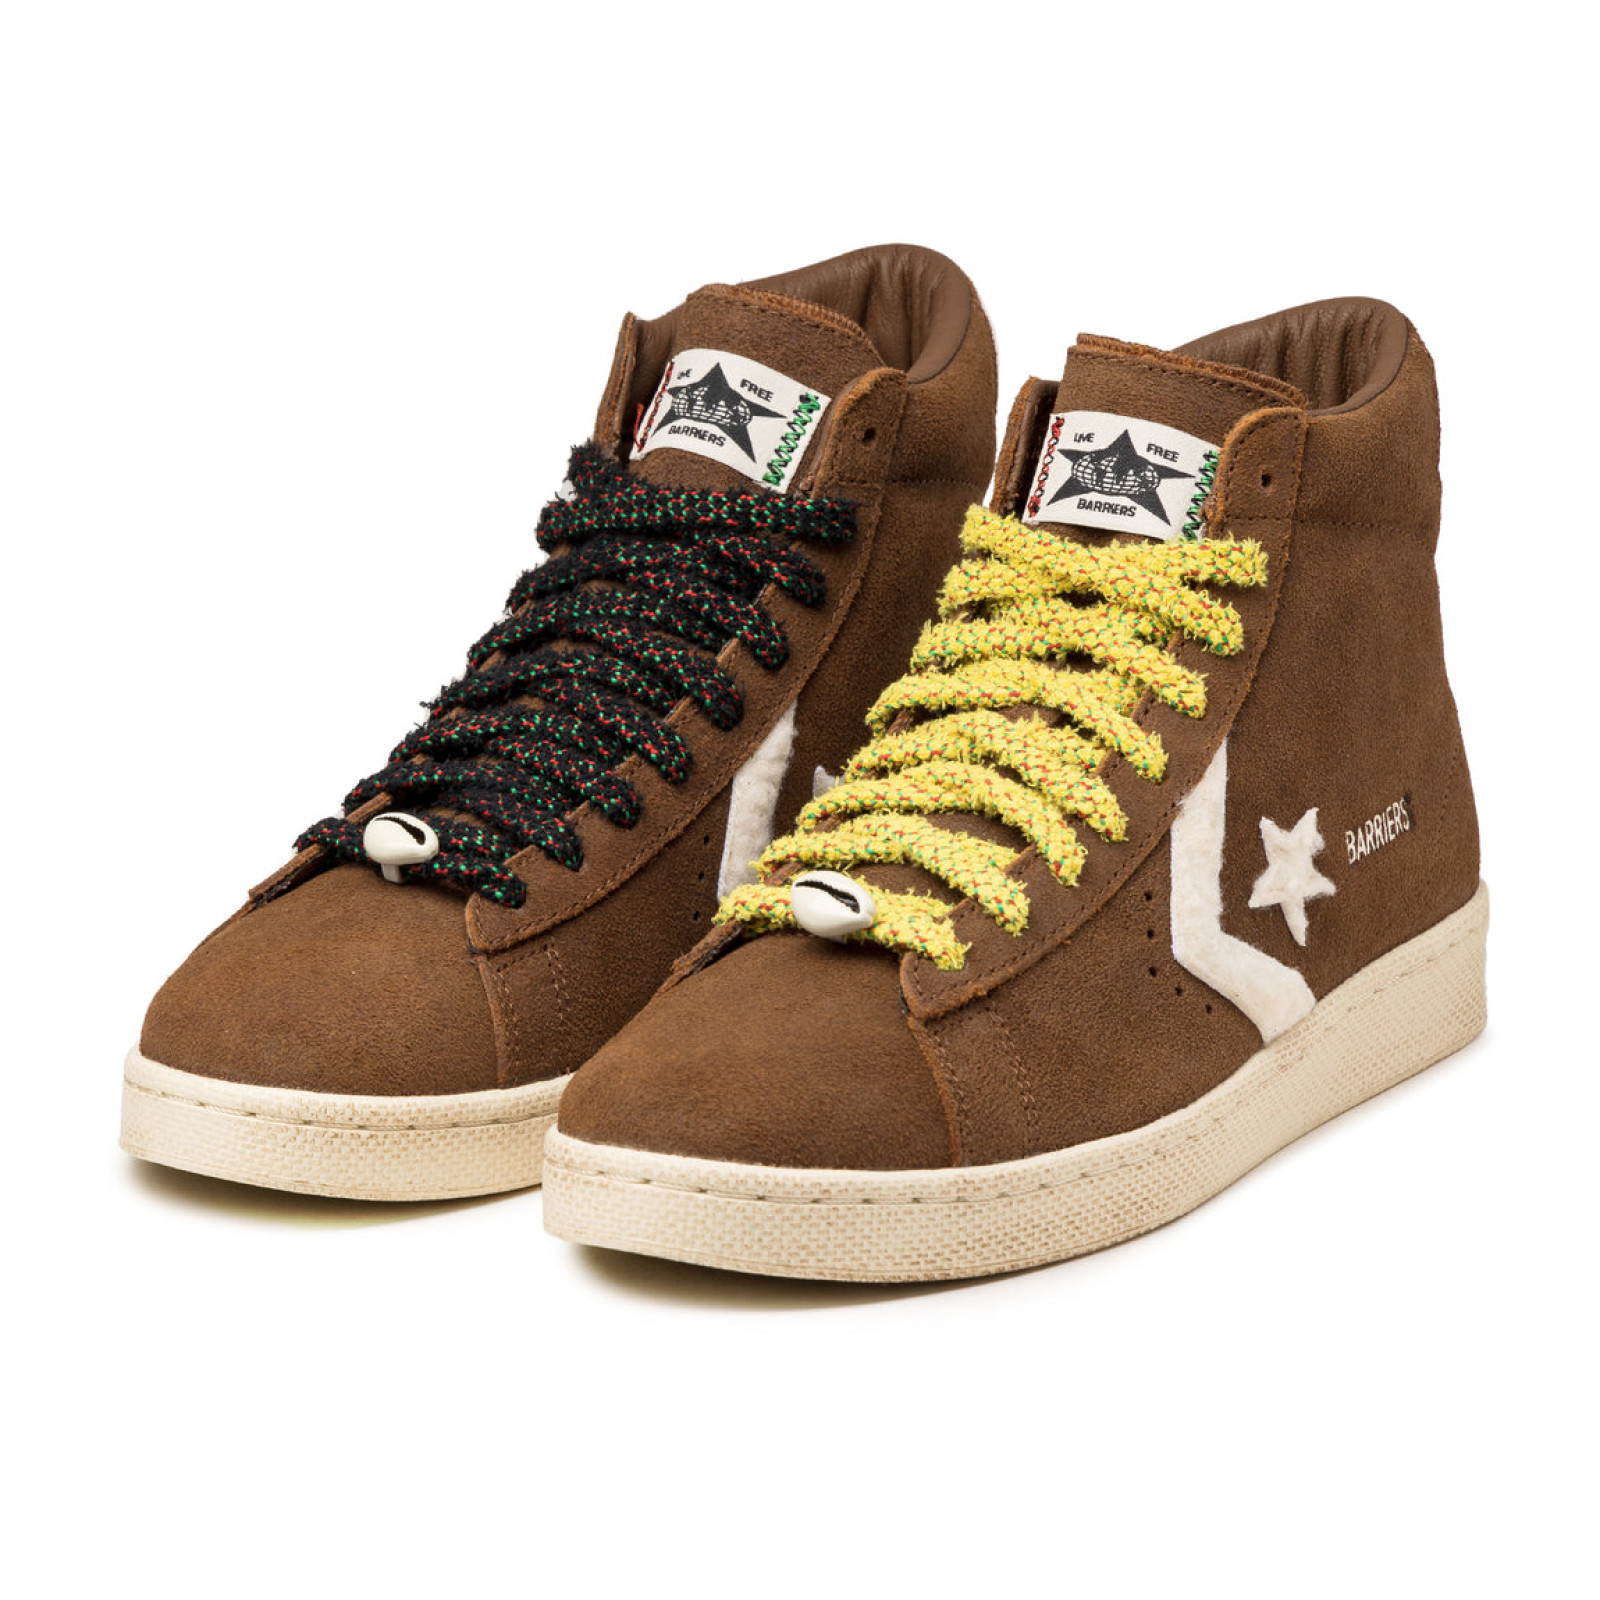 Converse x Barriers
Pro Leather Hi
Monks Robe / Black